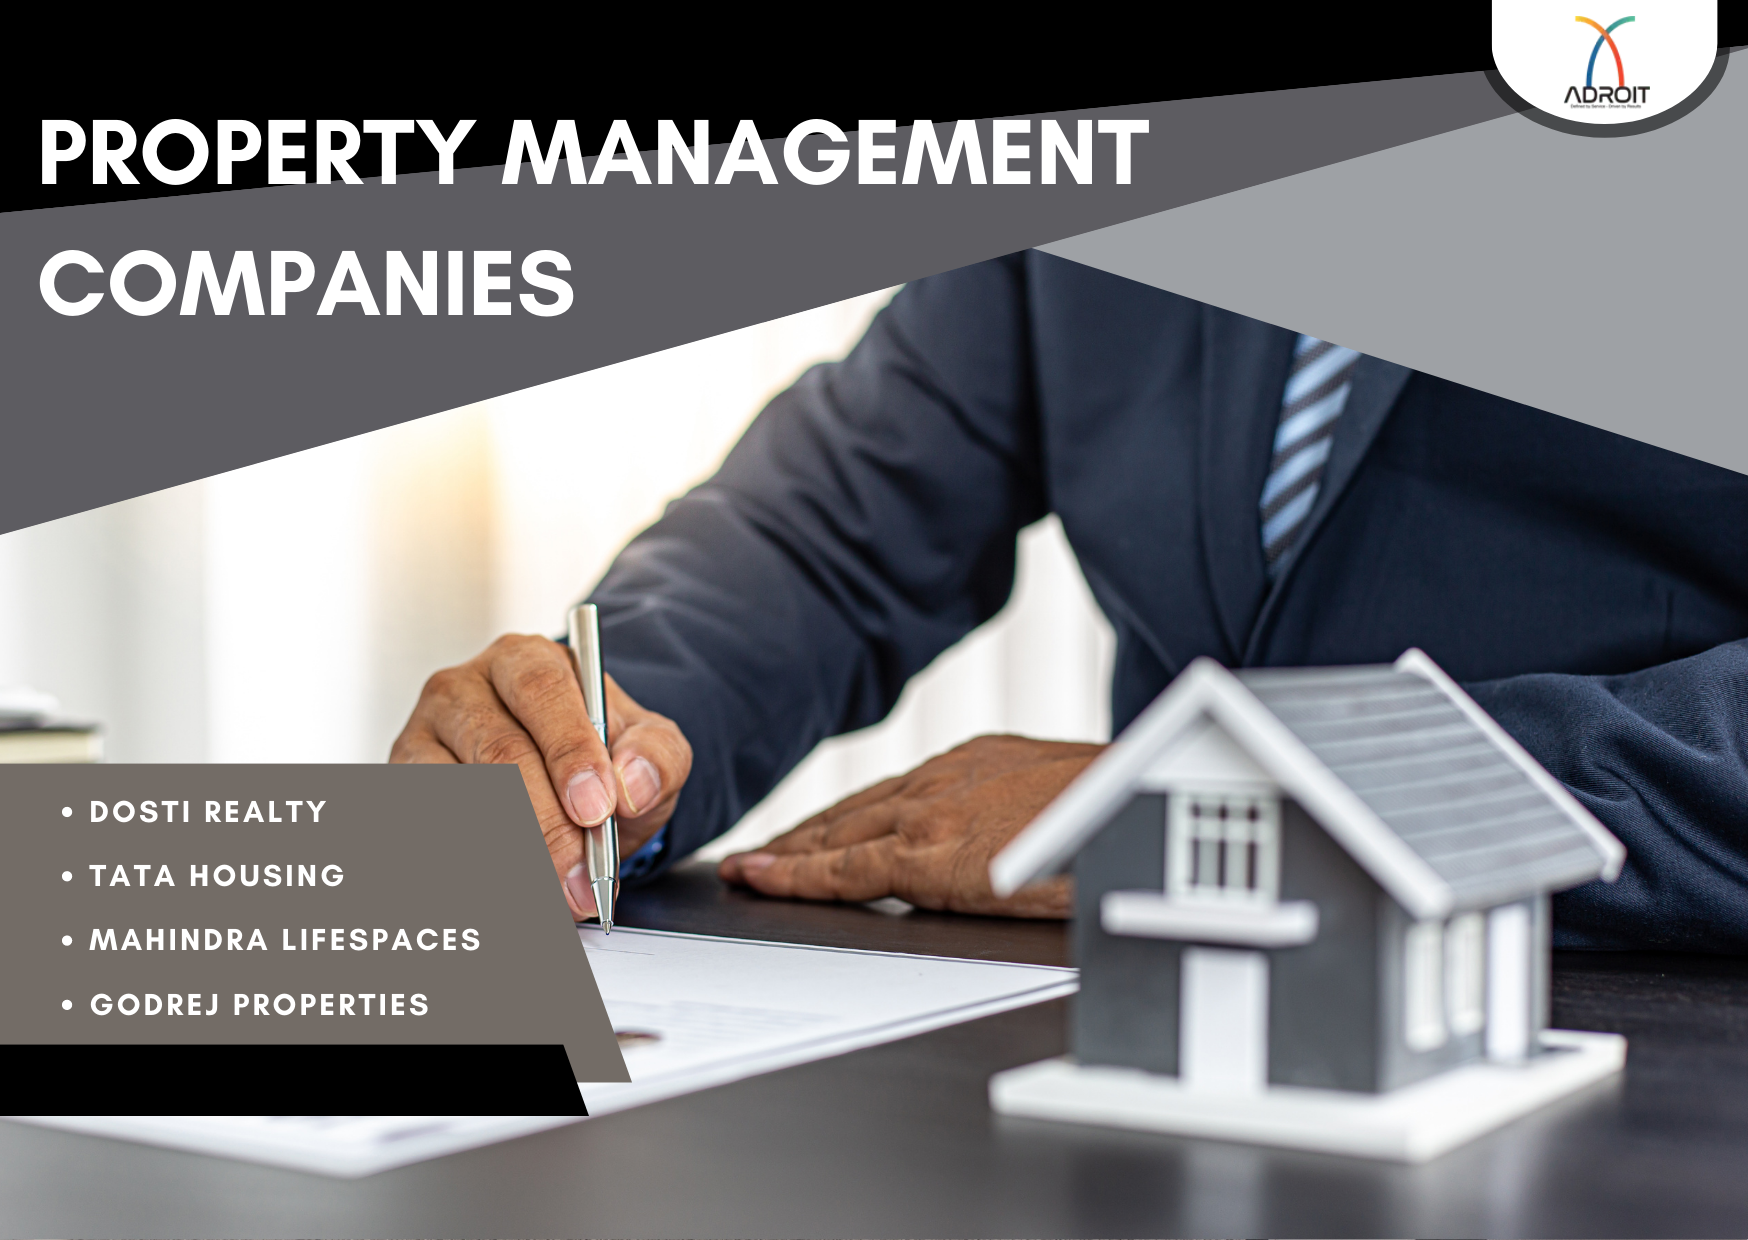  Mastering Real Estate: Expert Property Management Companies